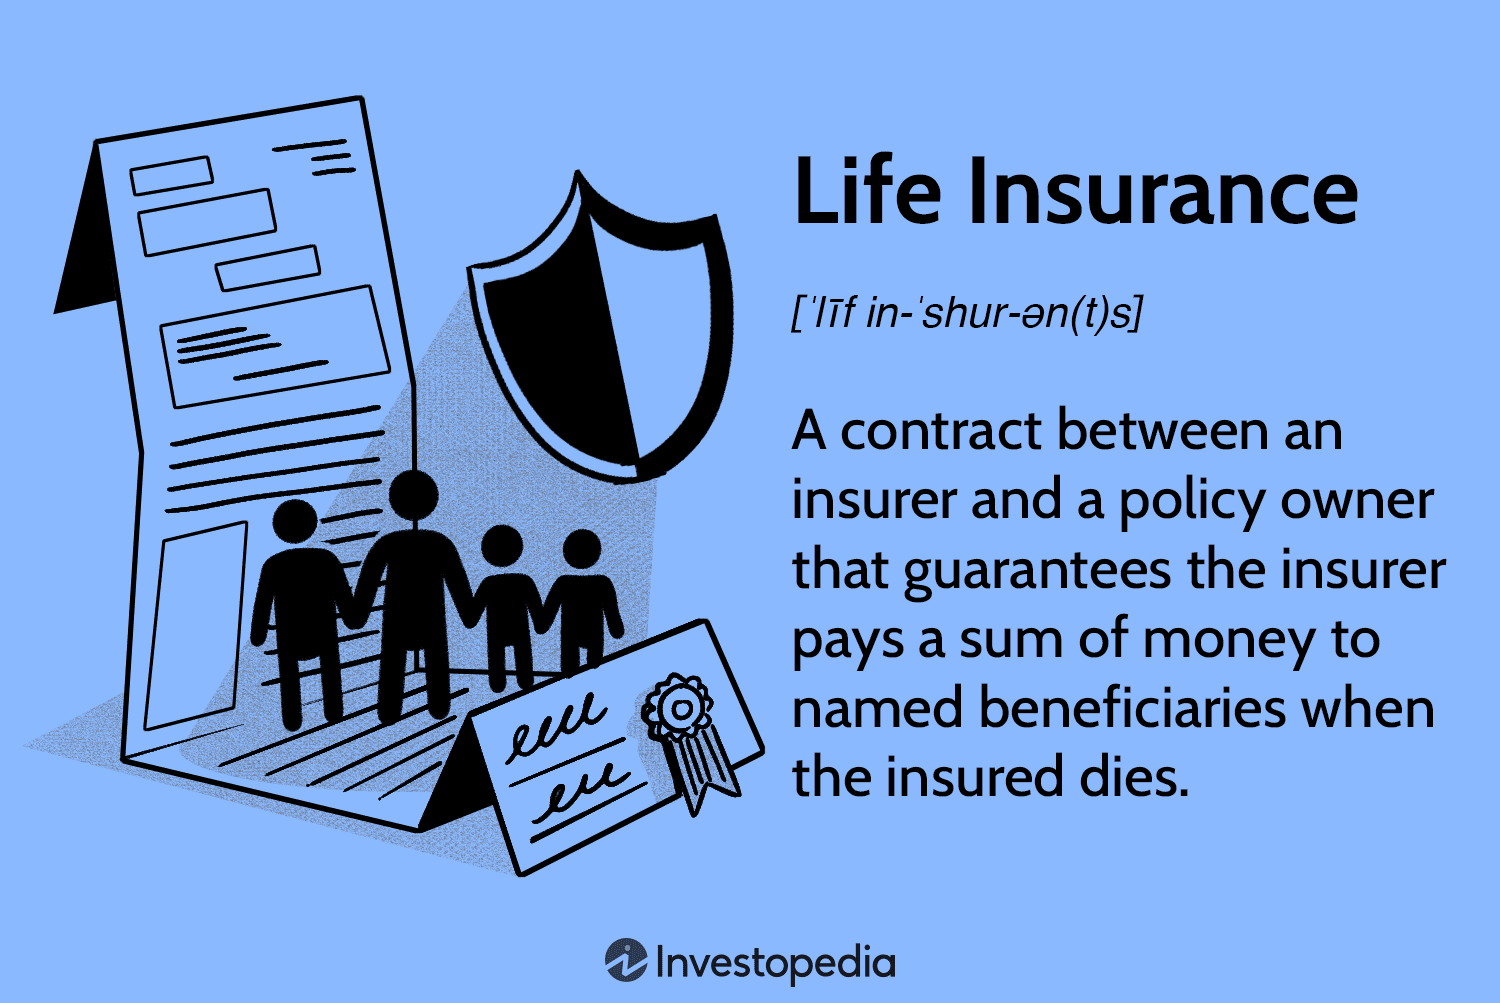 Some General Information About Insurance Policies